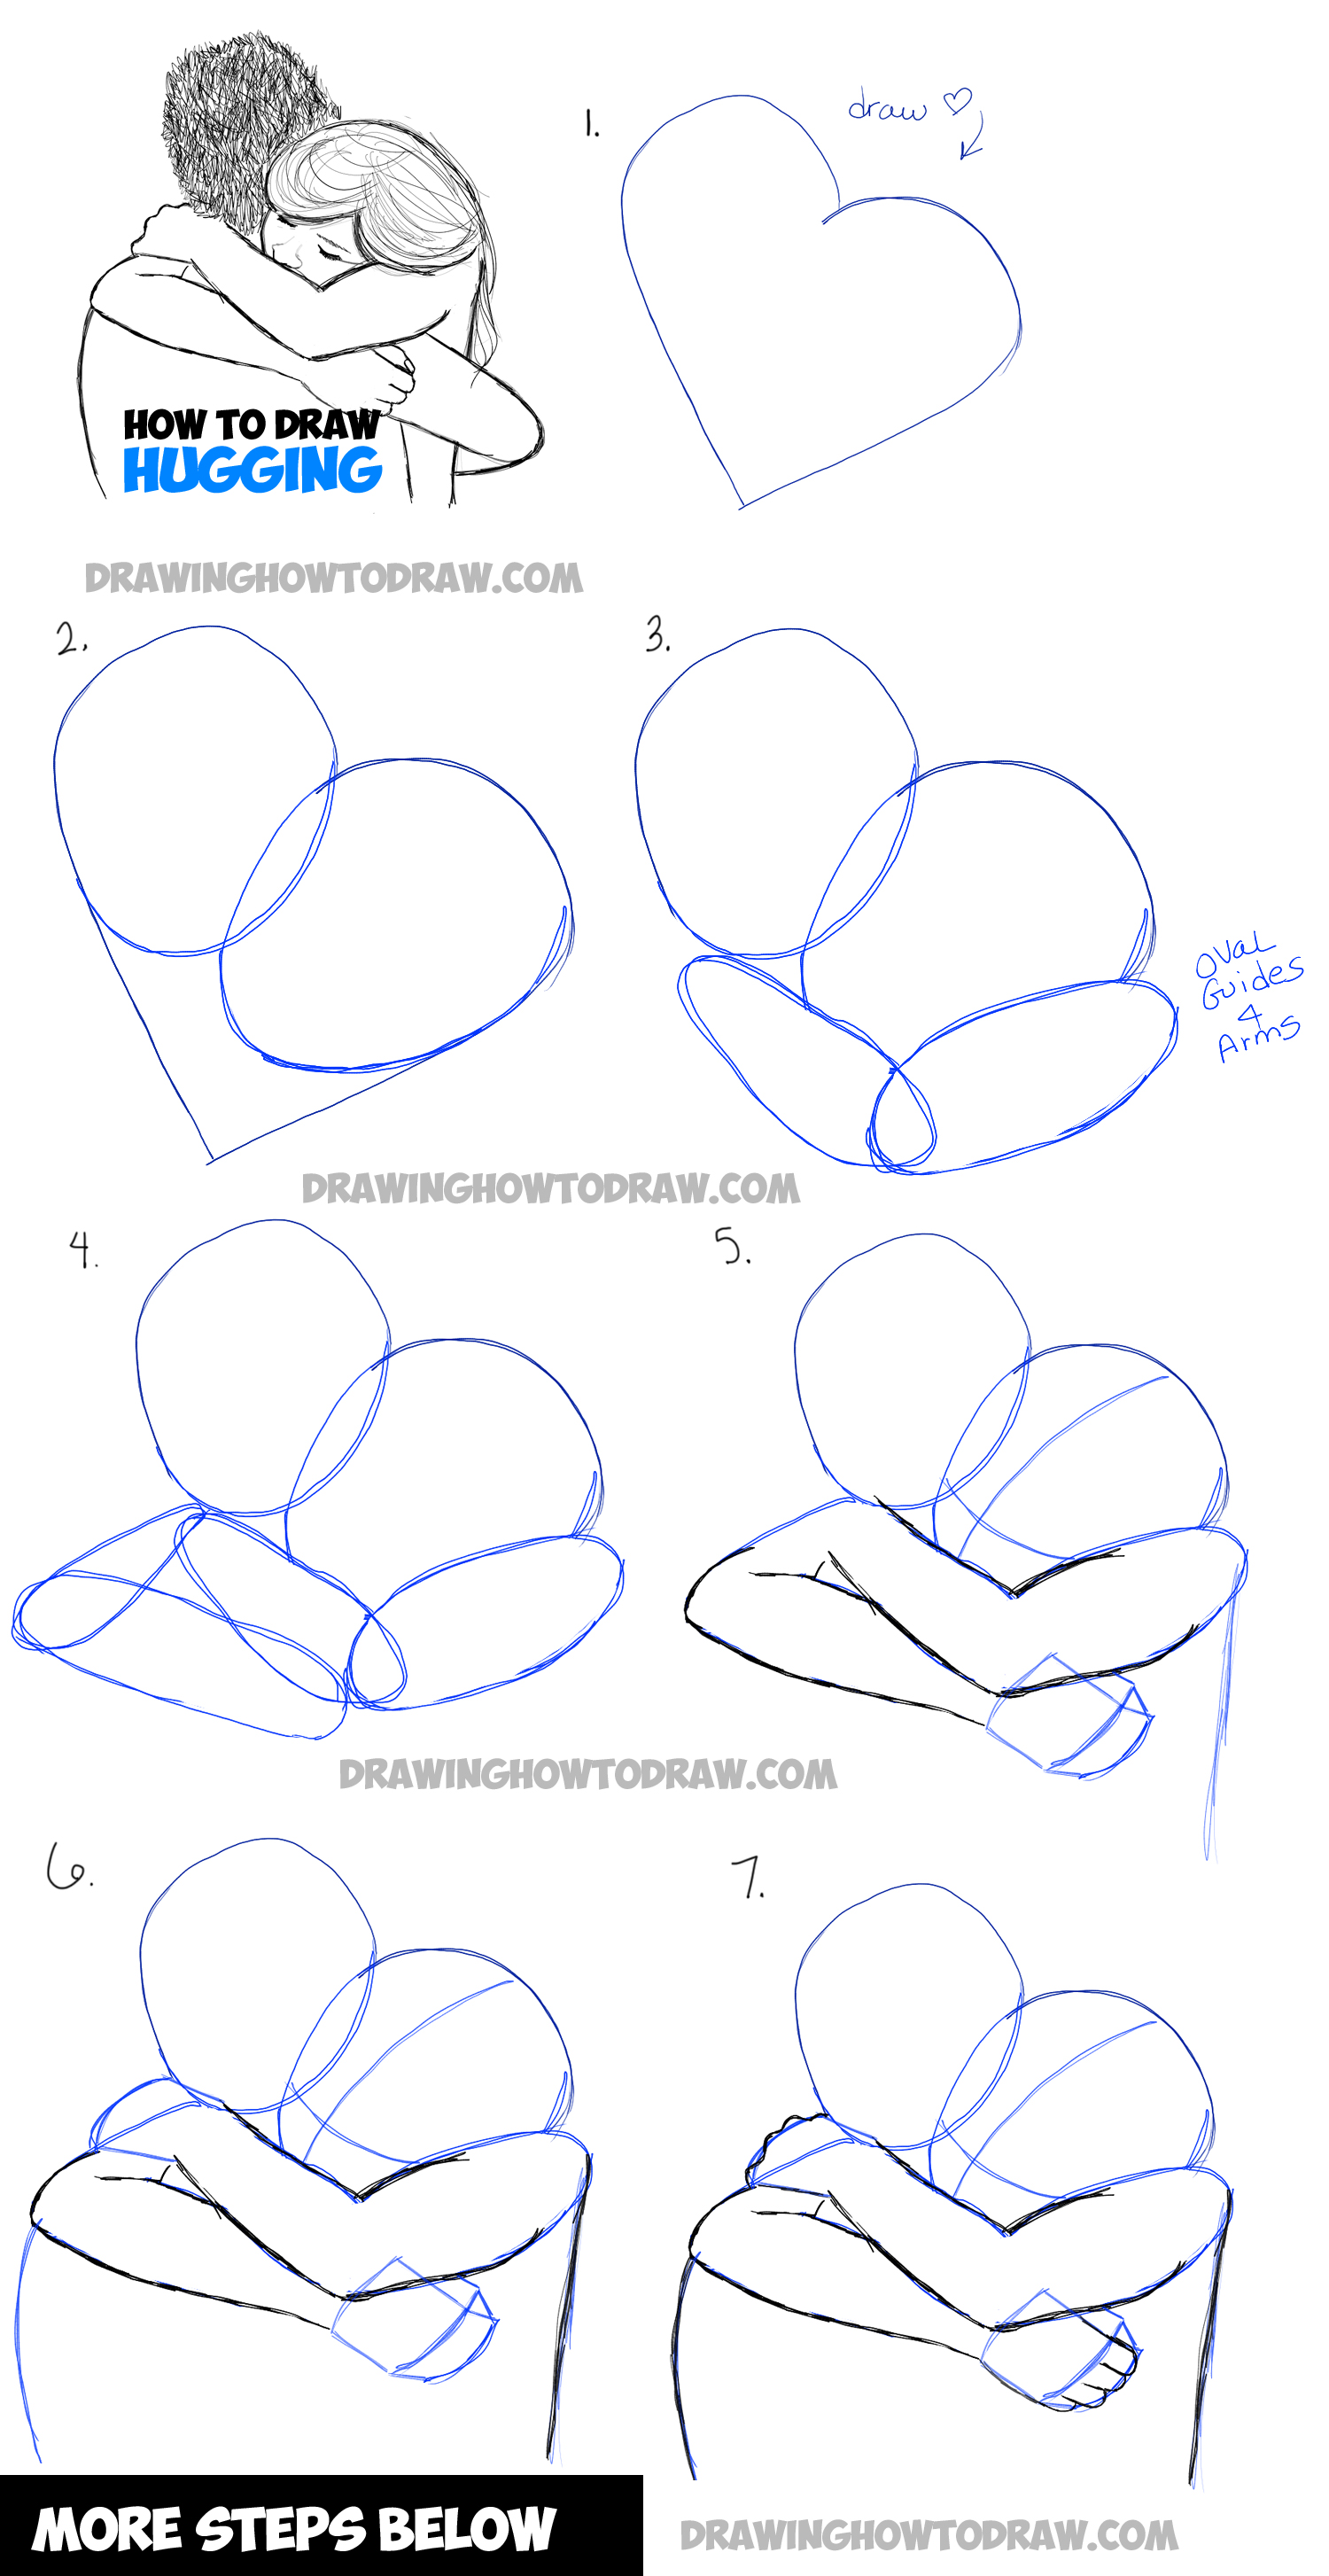 How to draw people step by step